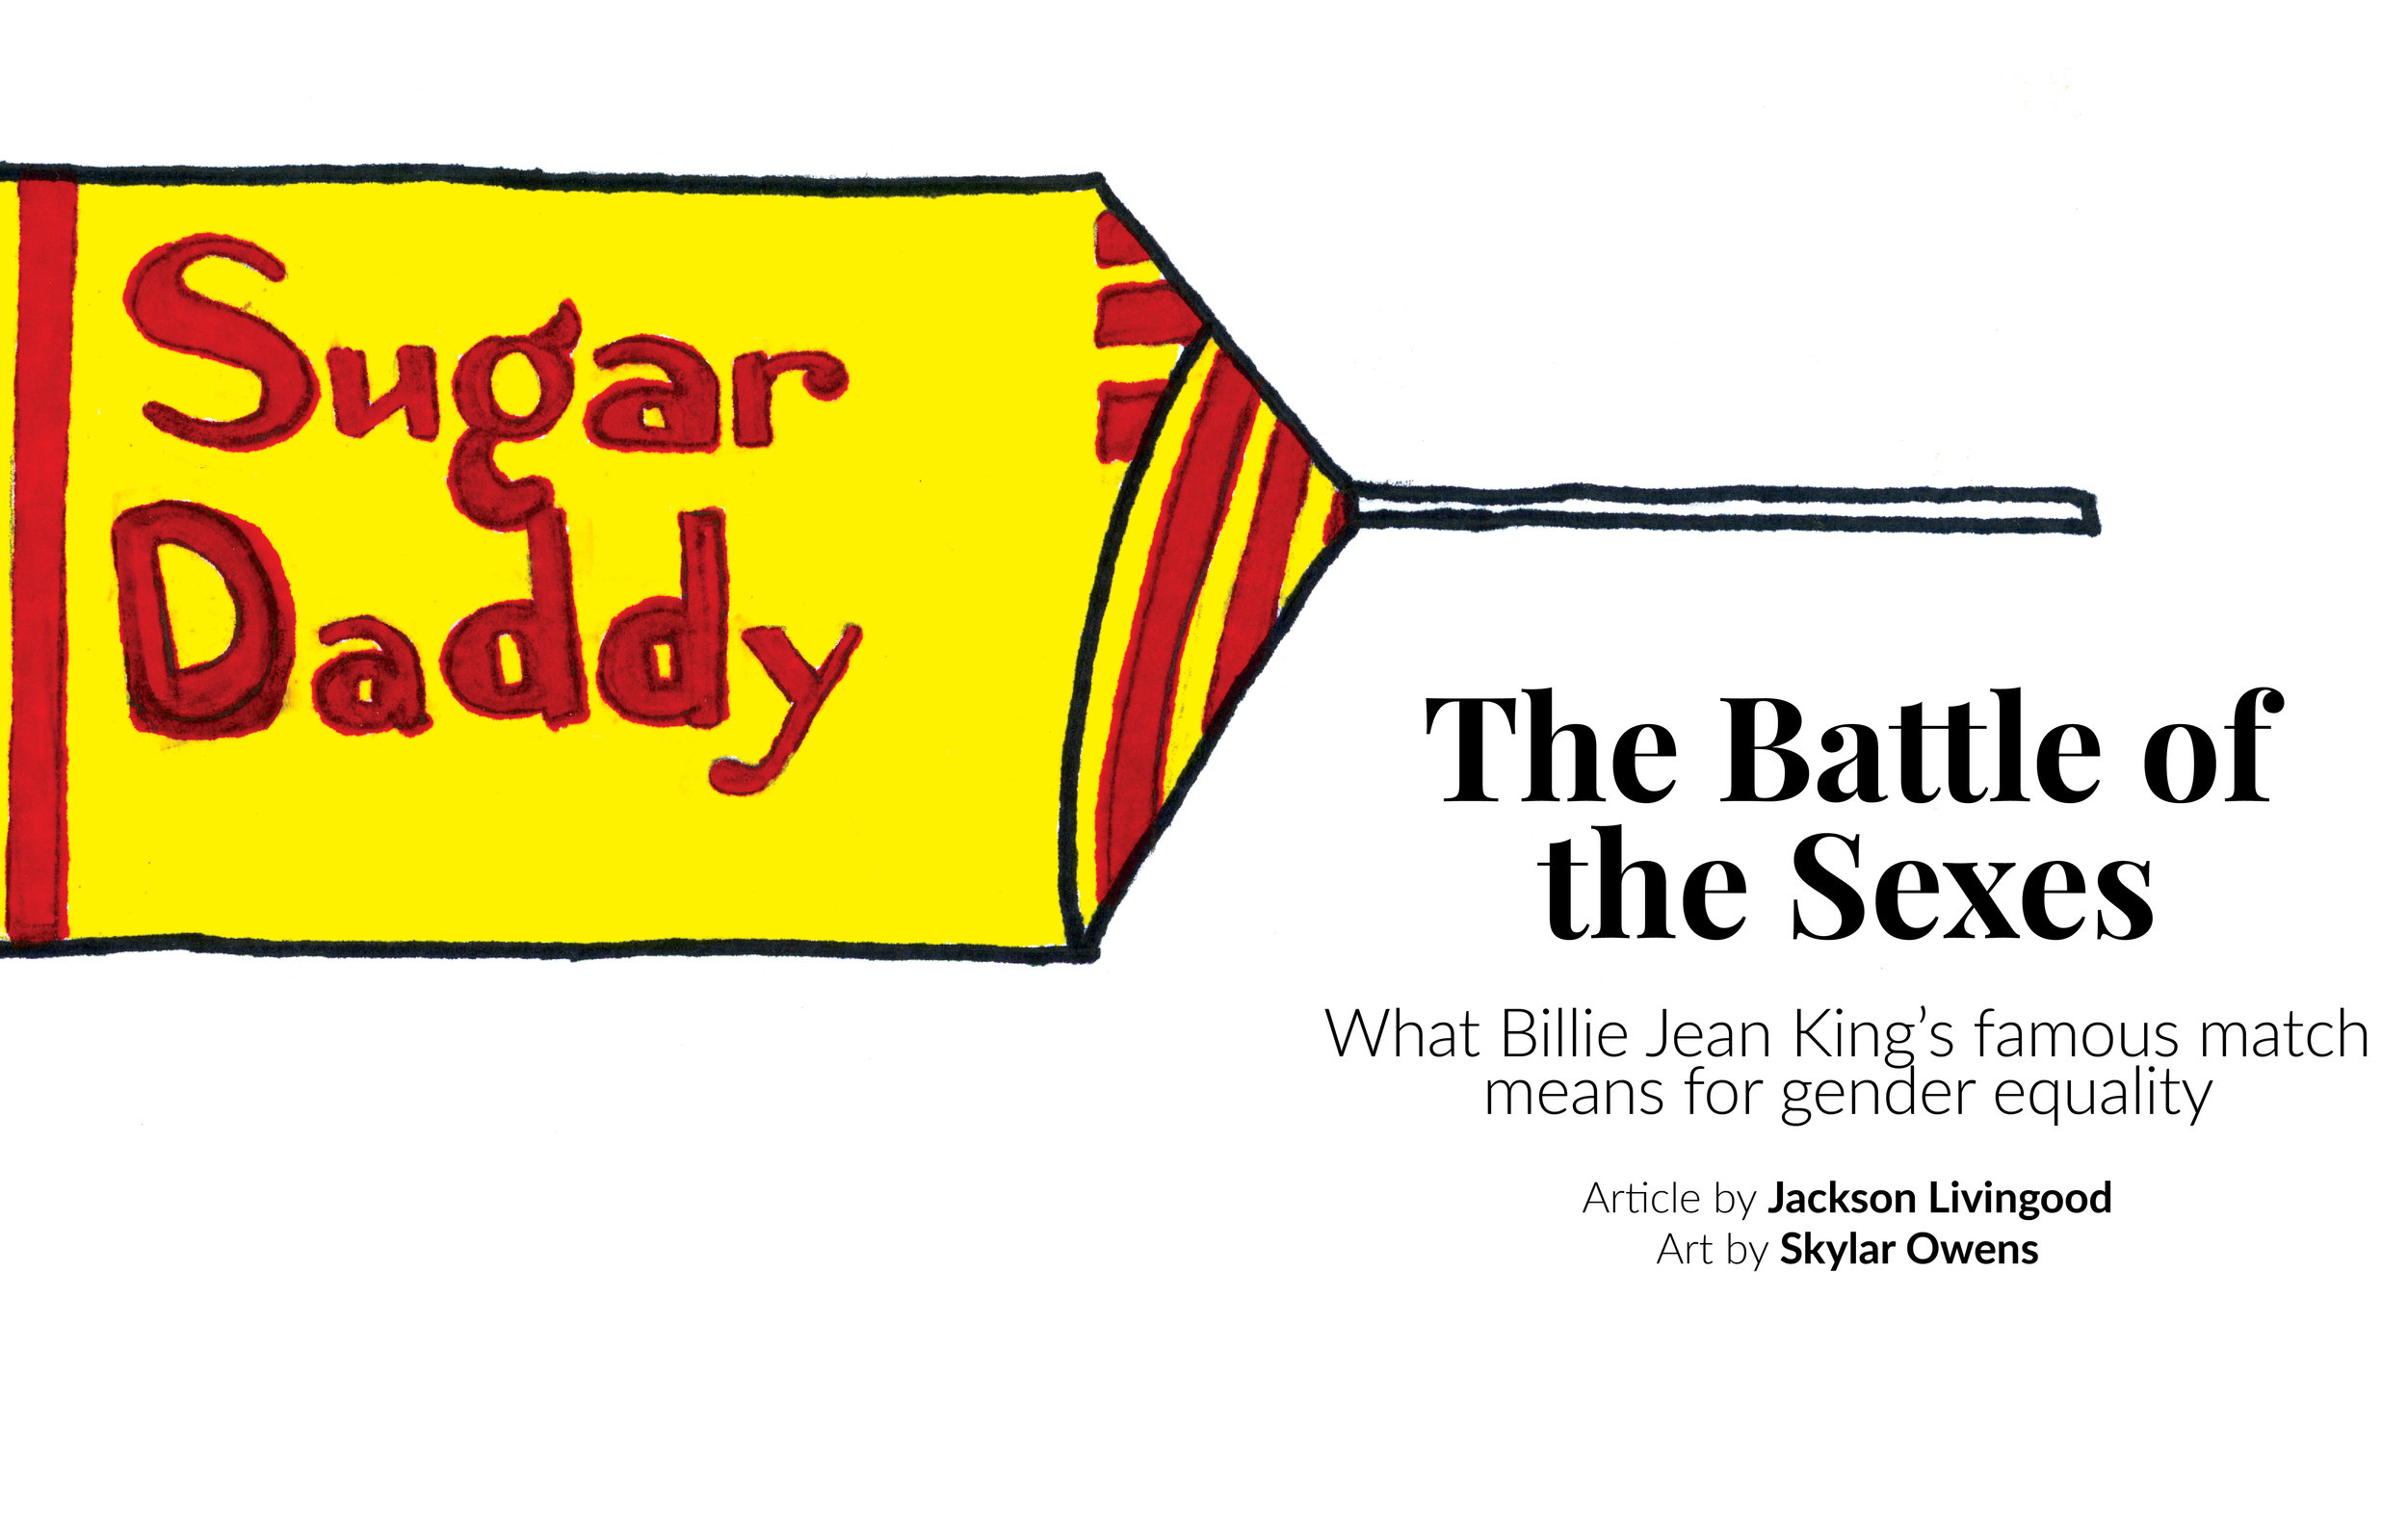 Looking Beyond the “Battle of the Sexes” – Pieces of History